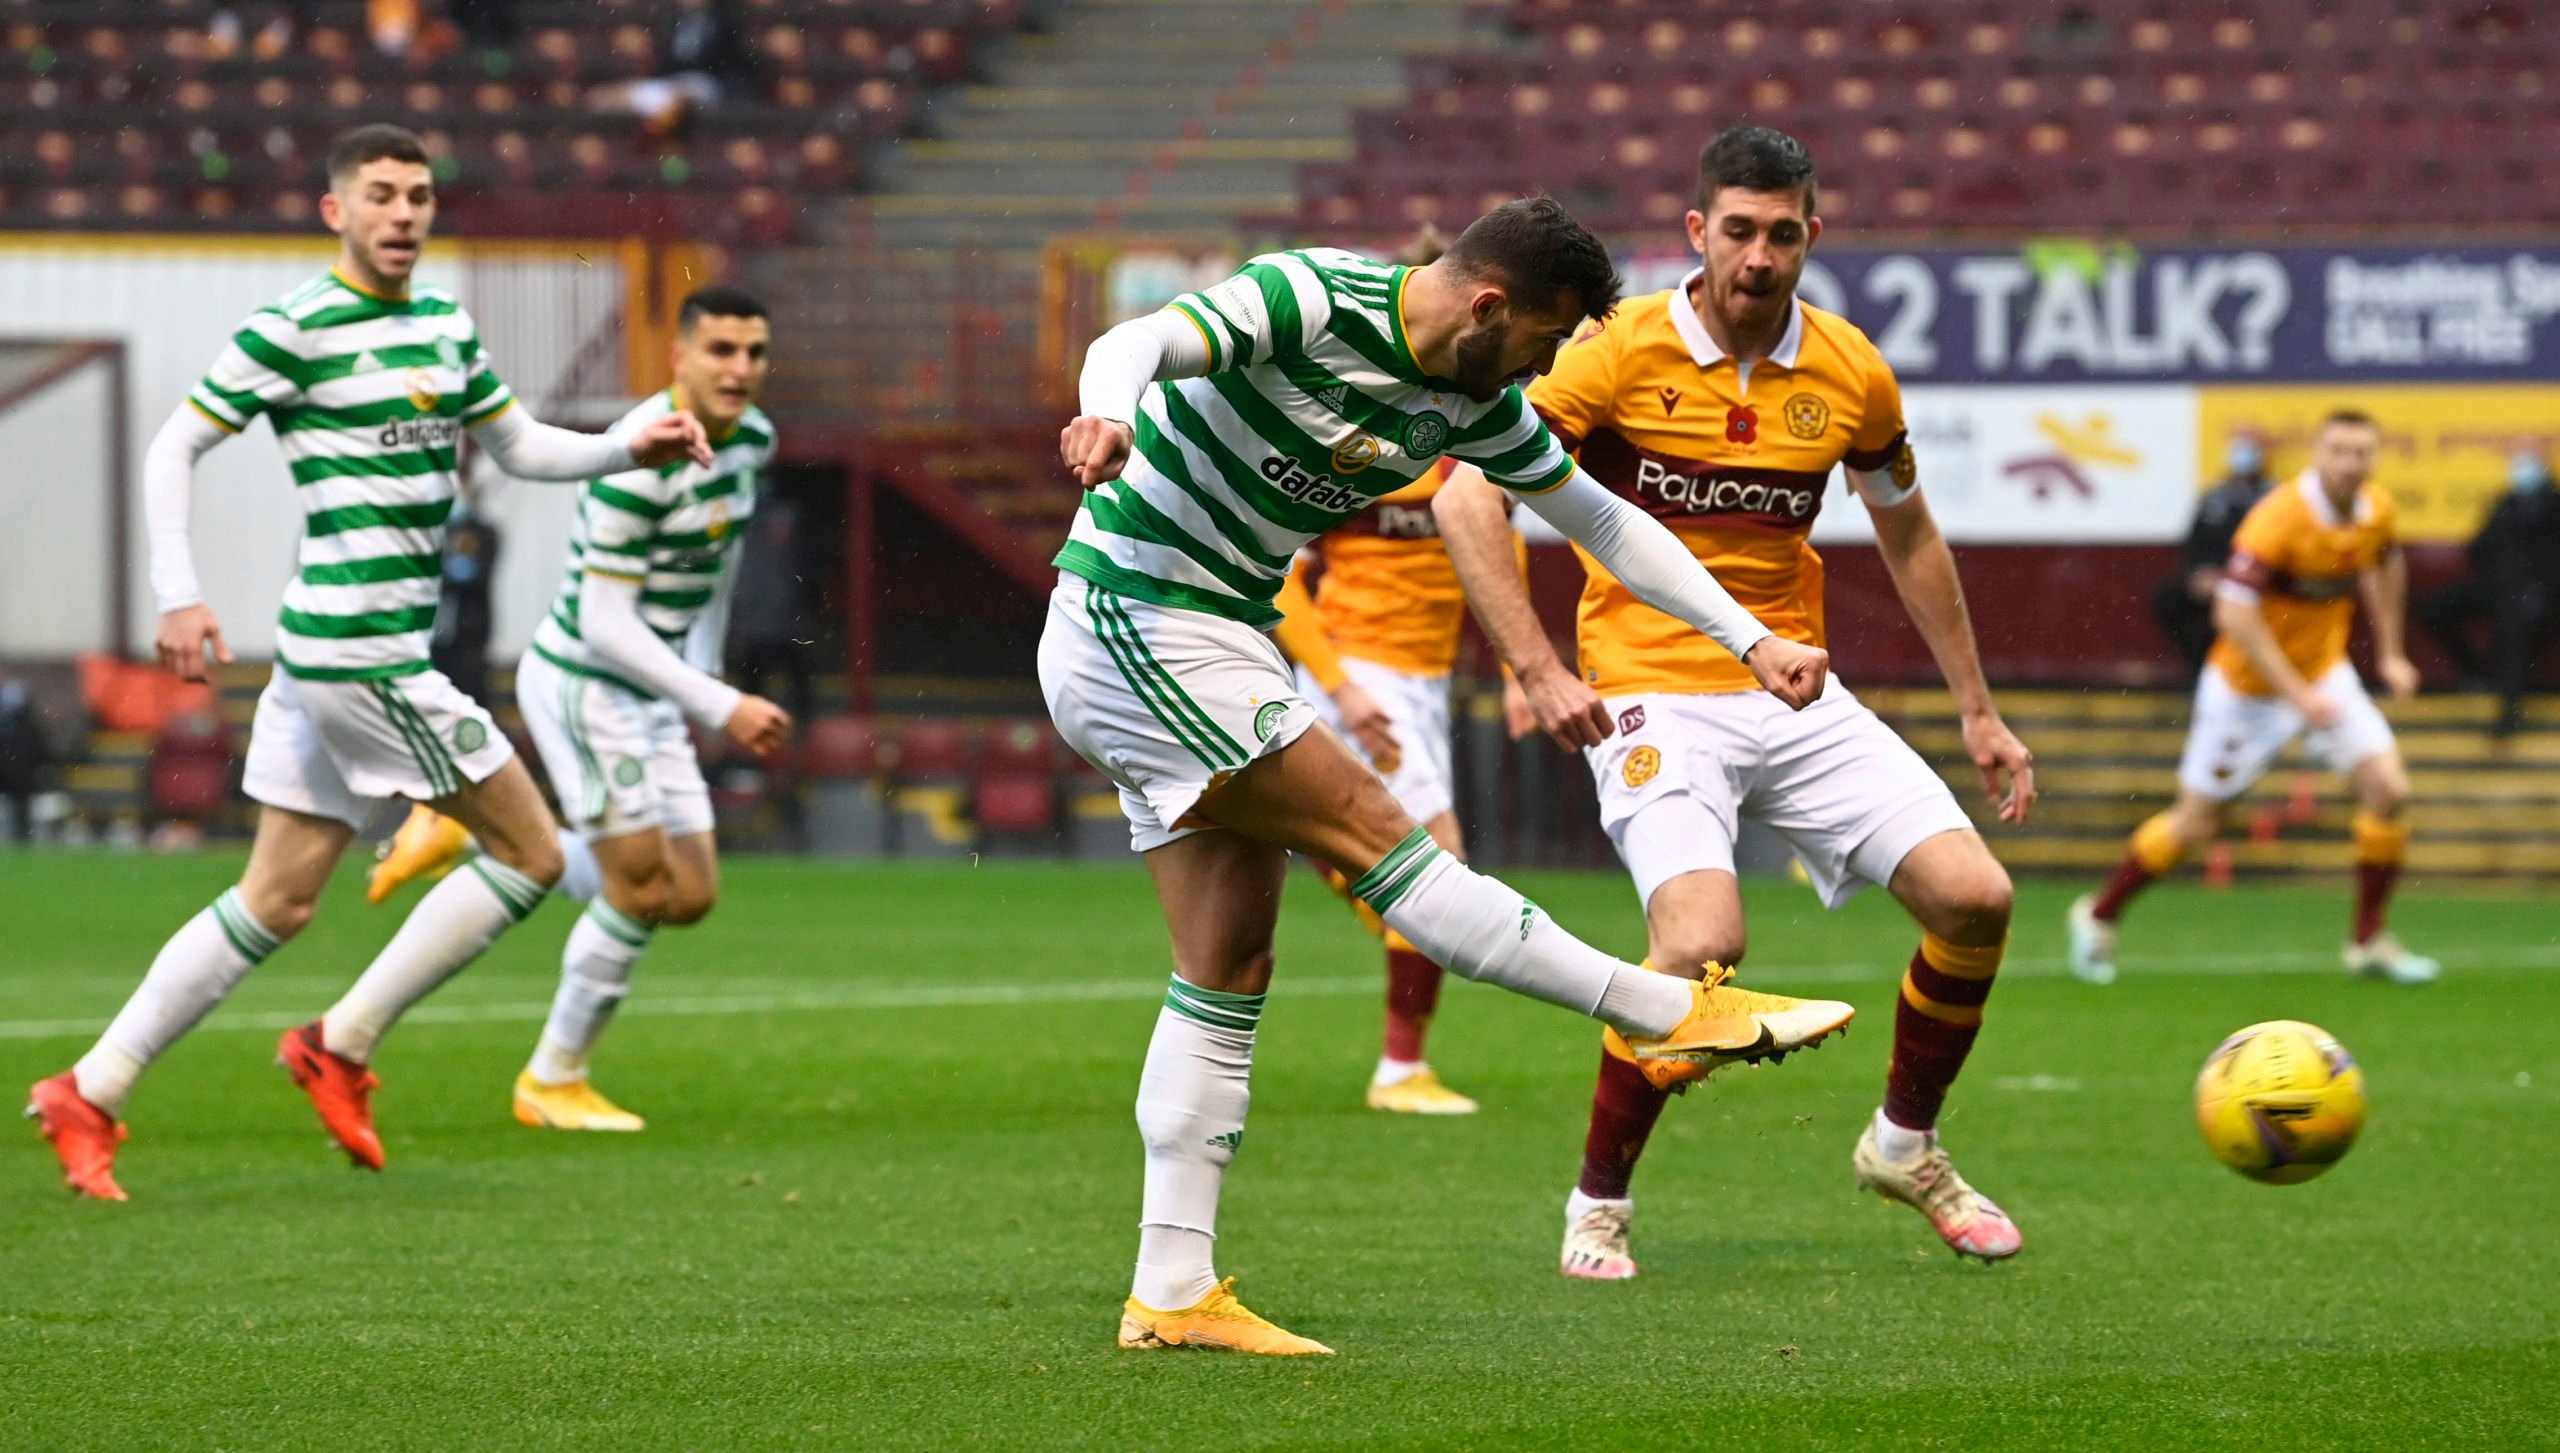 Albian Ajeti made a key contribution for Celtic today